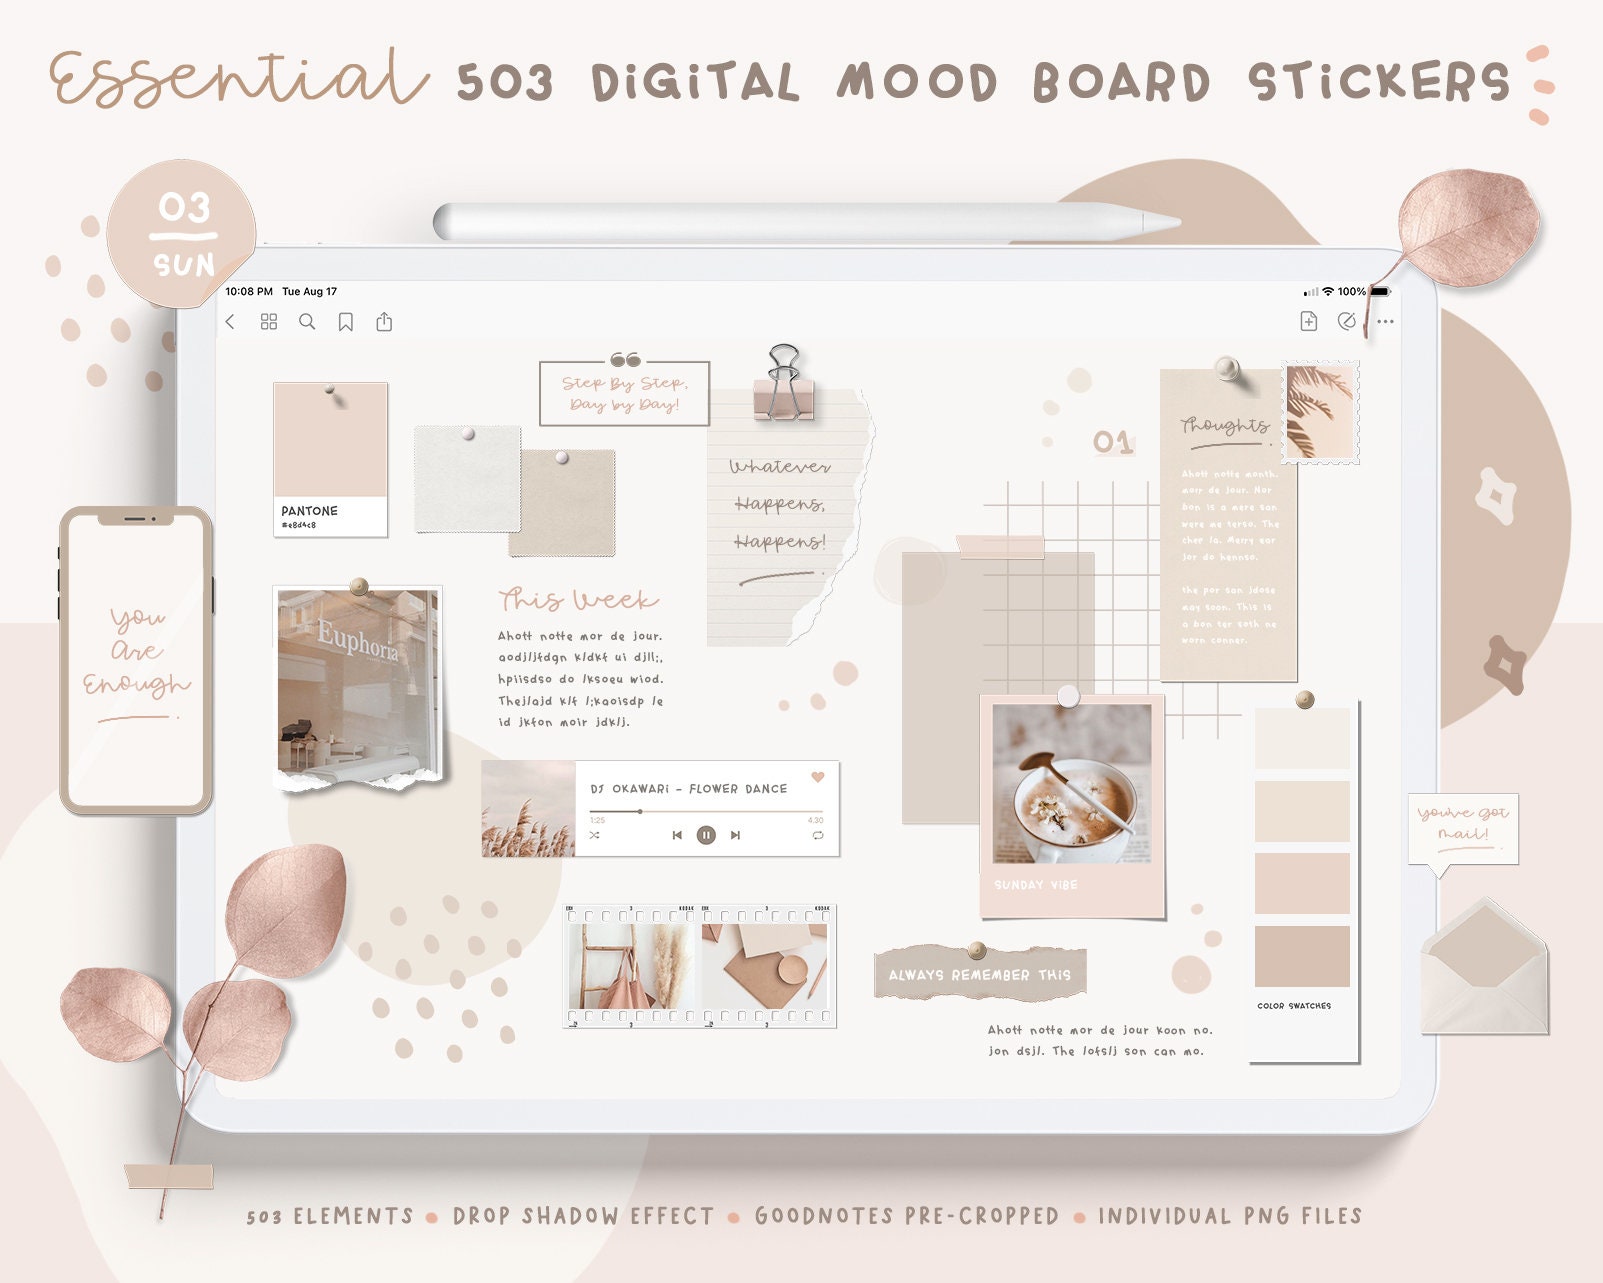 60+ Dream Board Stickers - House Of Sonshine